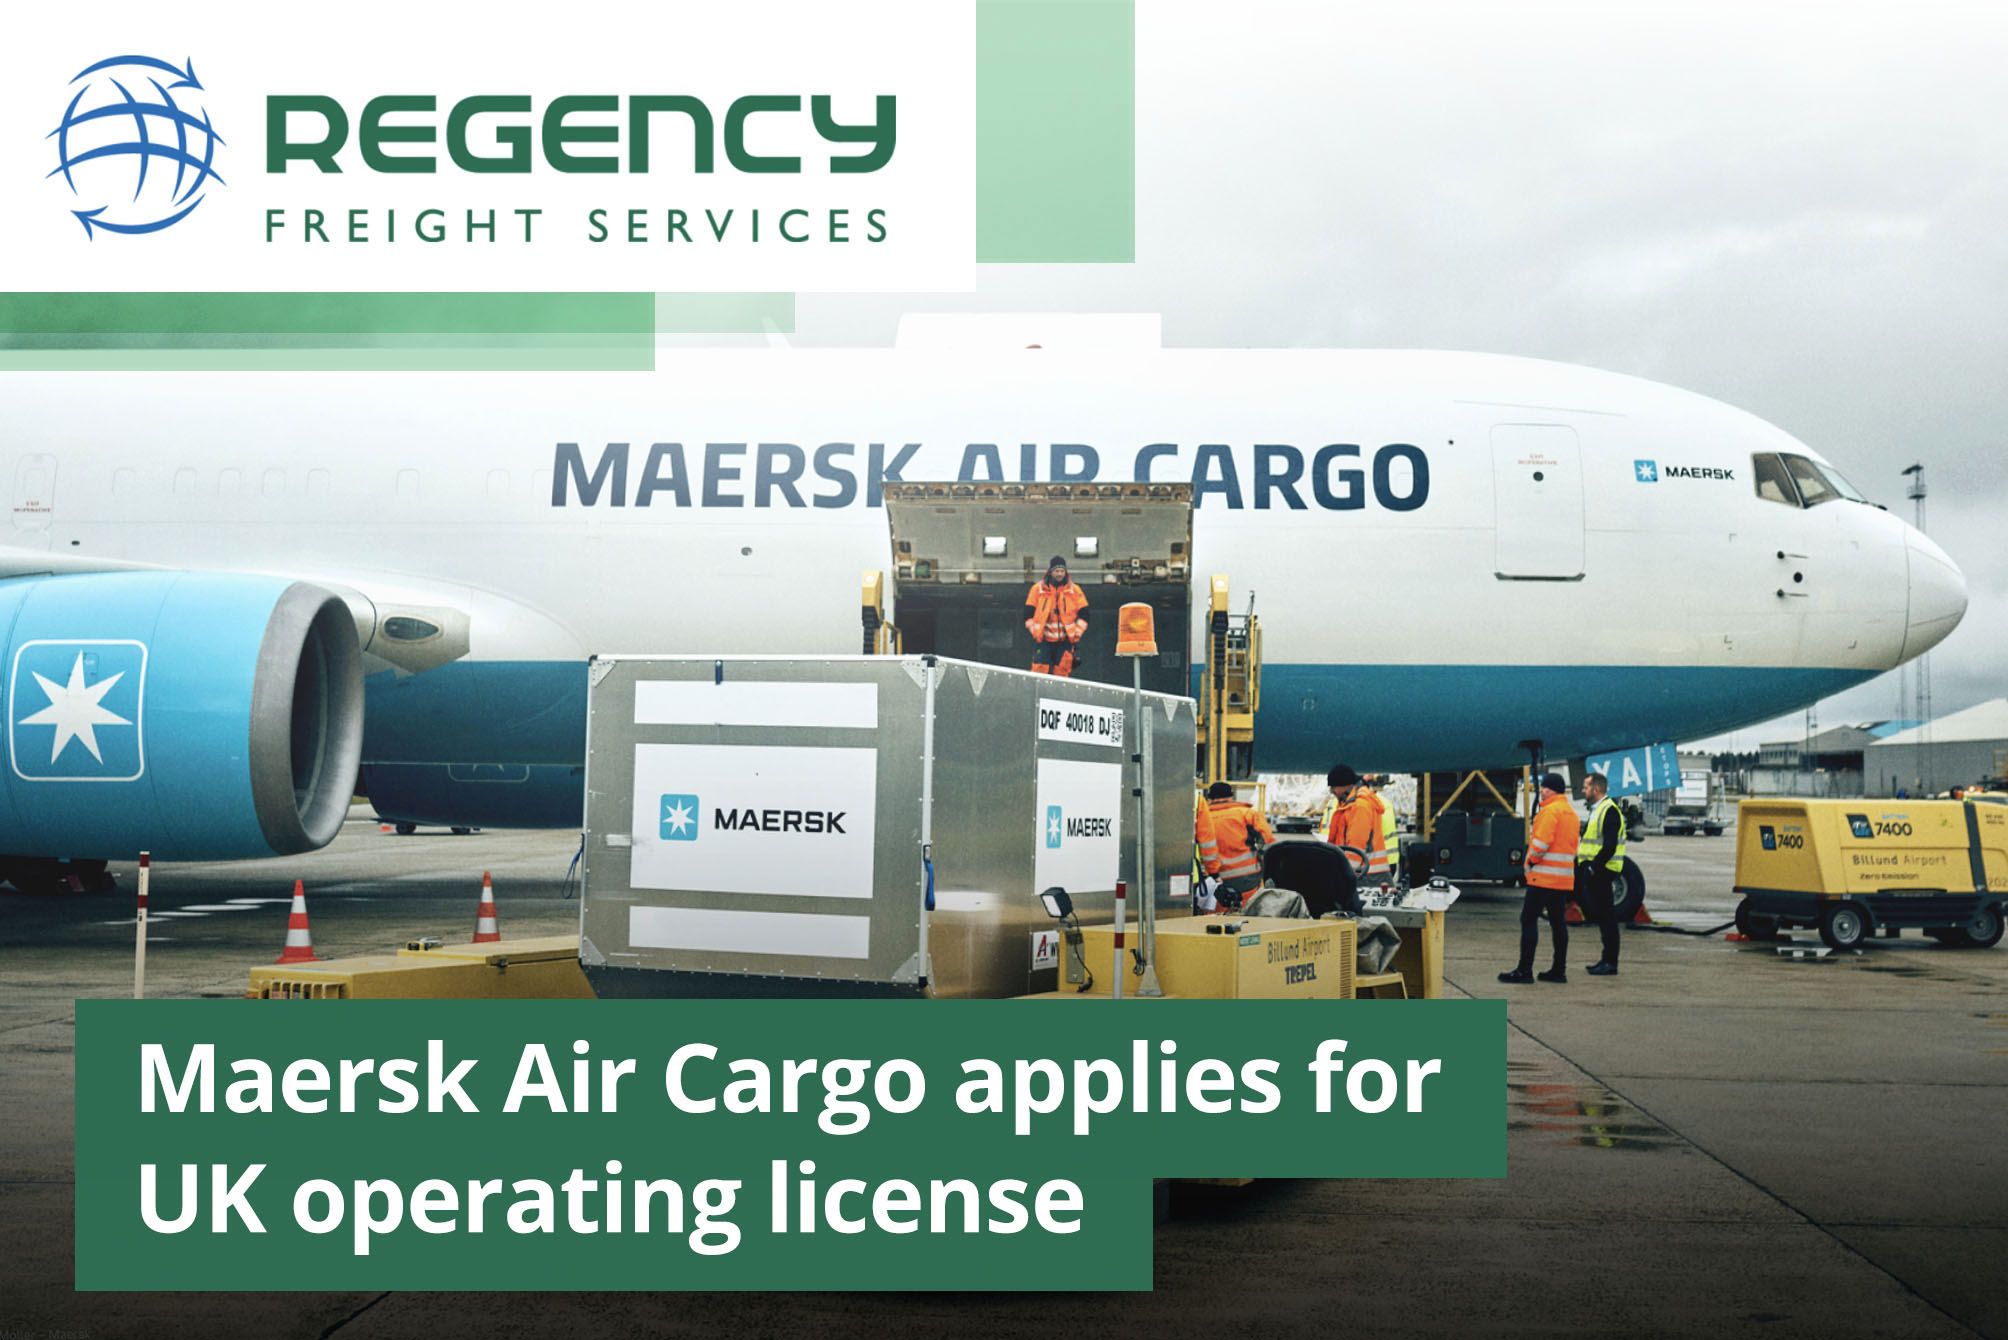 Maersk Air Cargo applies for UK operating license